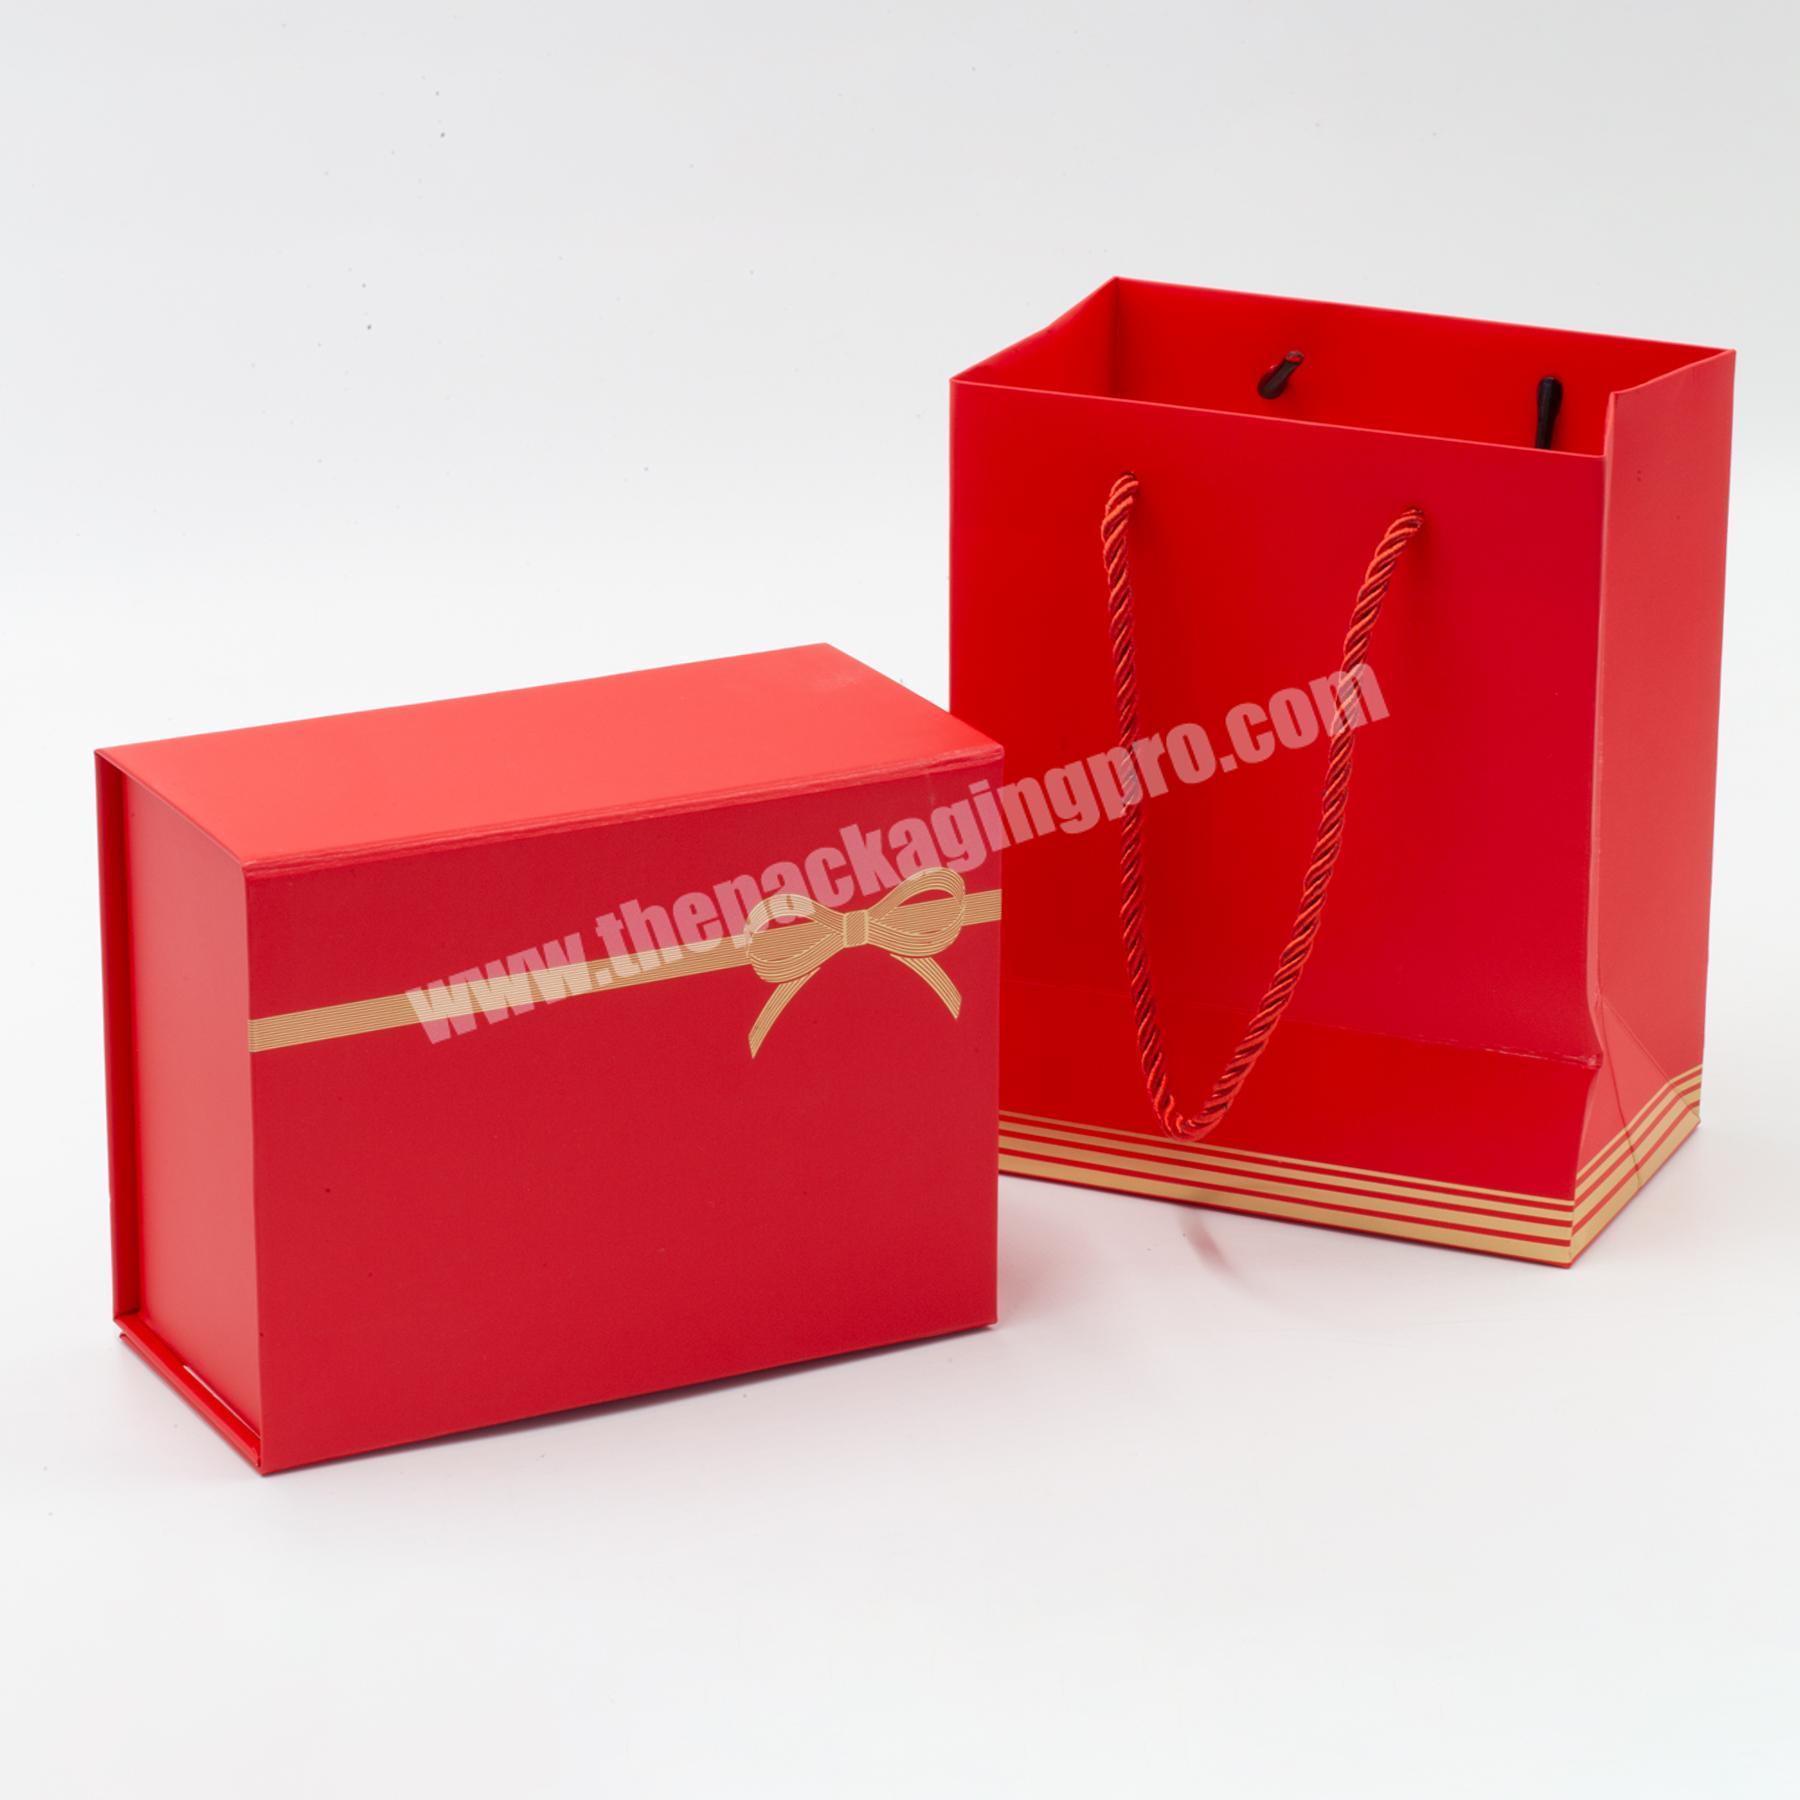 Low moq red color custom printing gift box with paper handbag deep box for present Christmas gift packaging box with bow